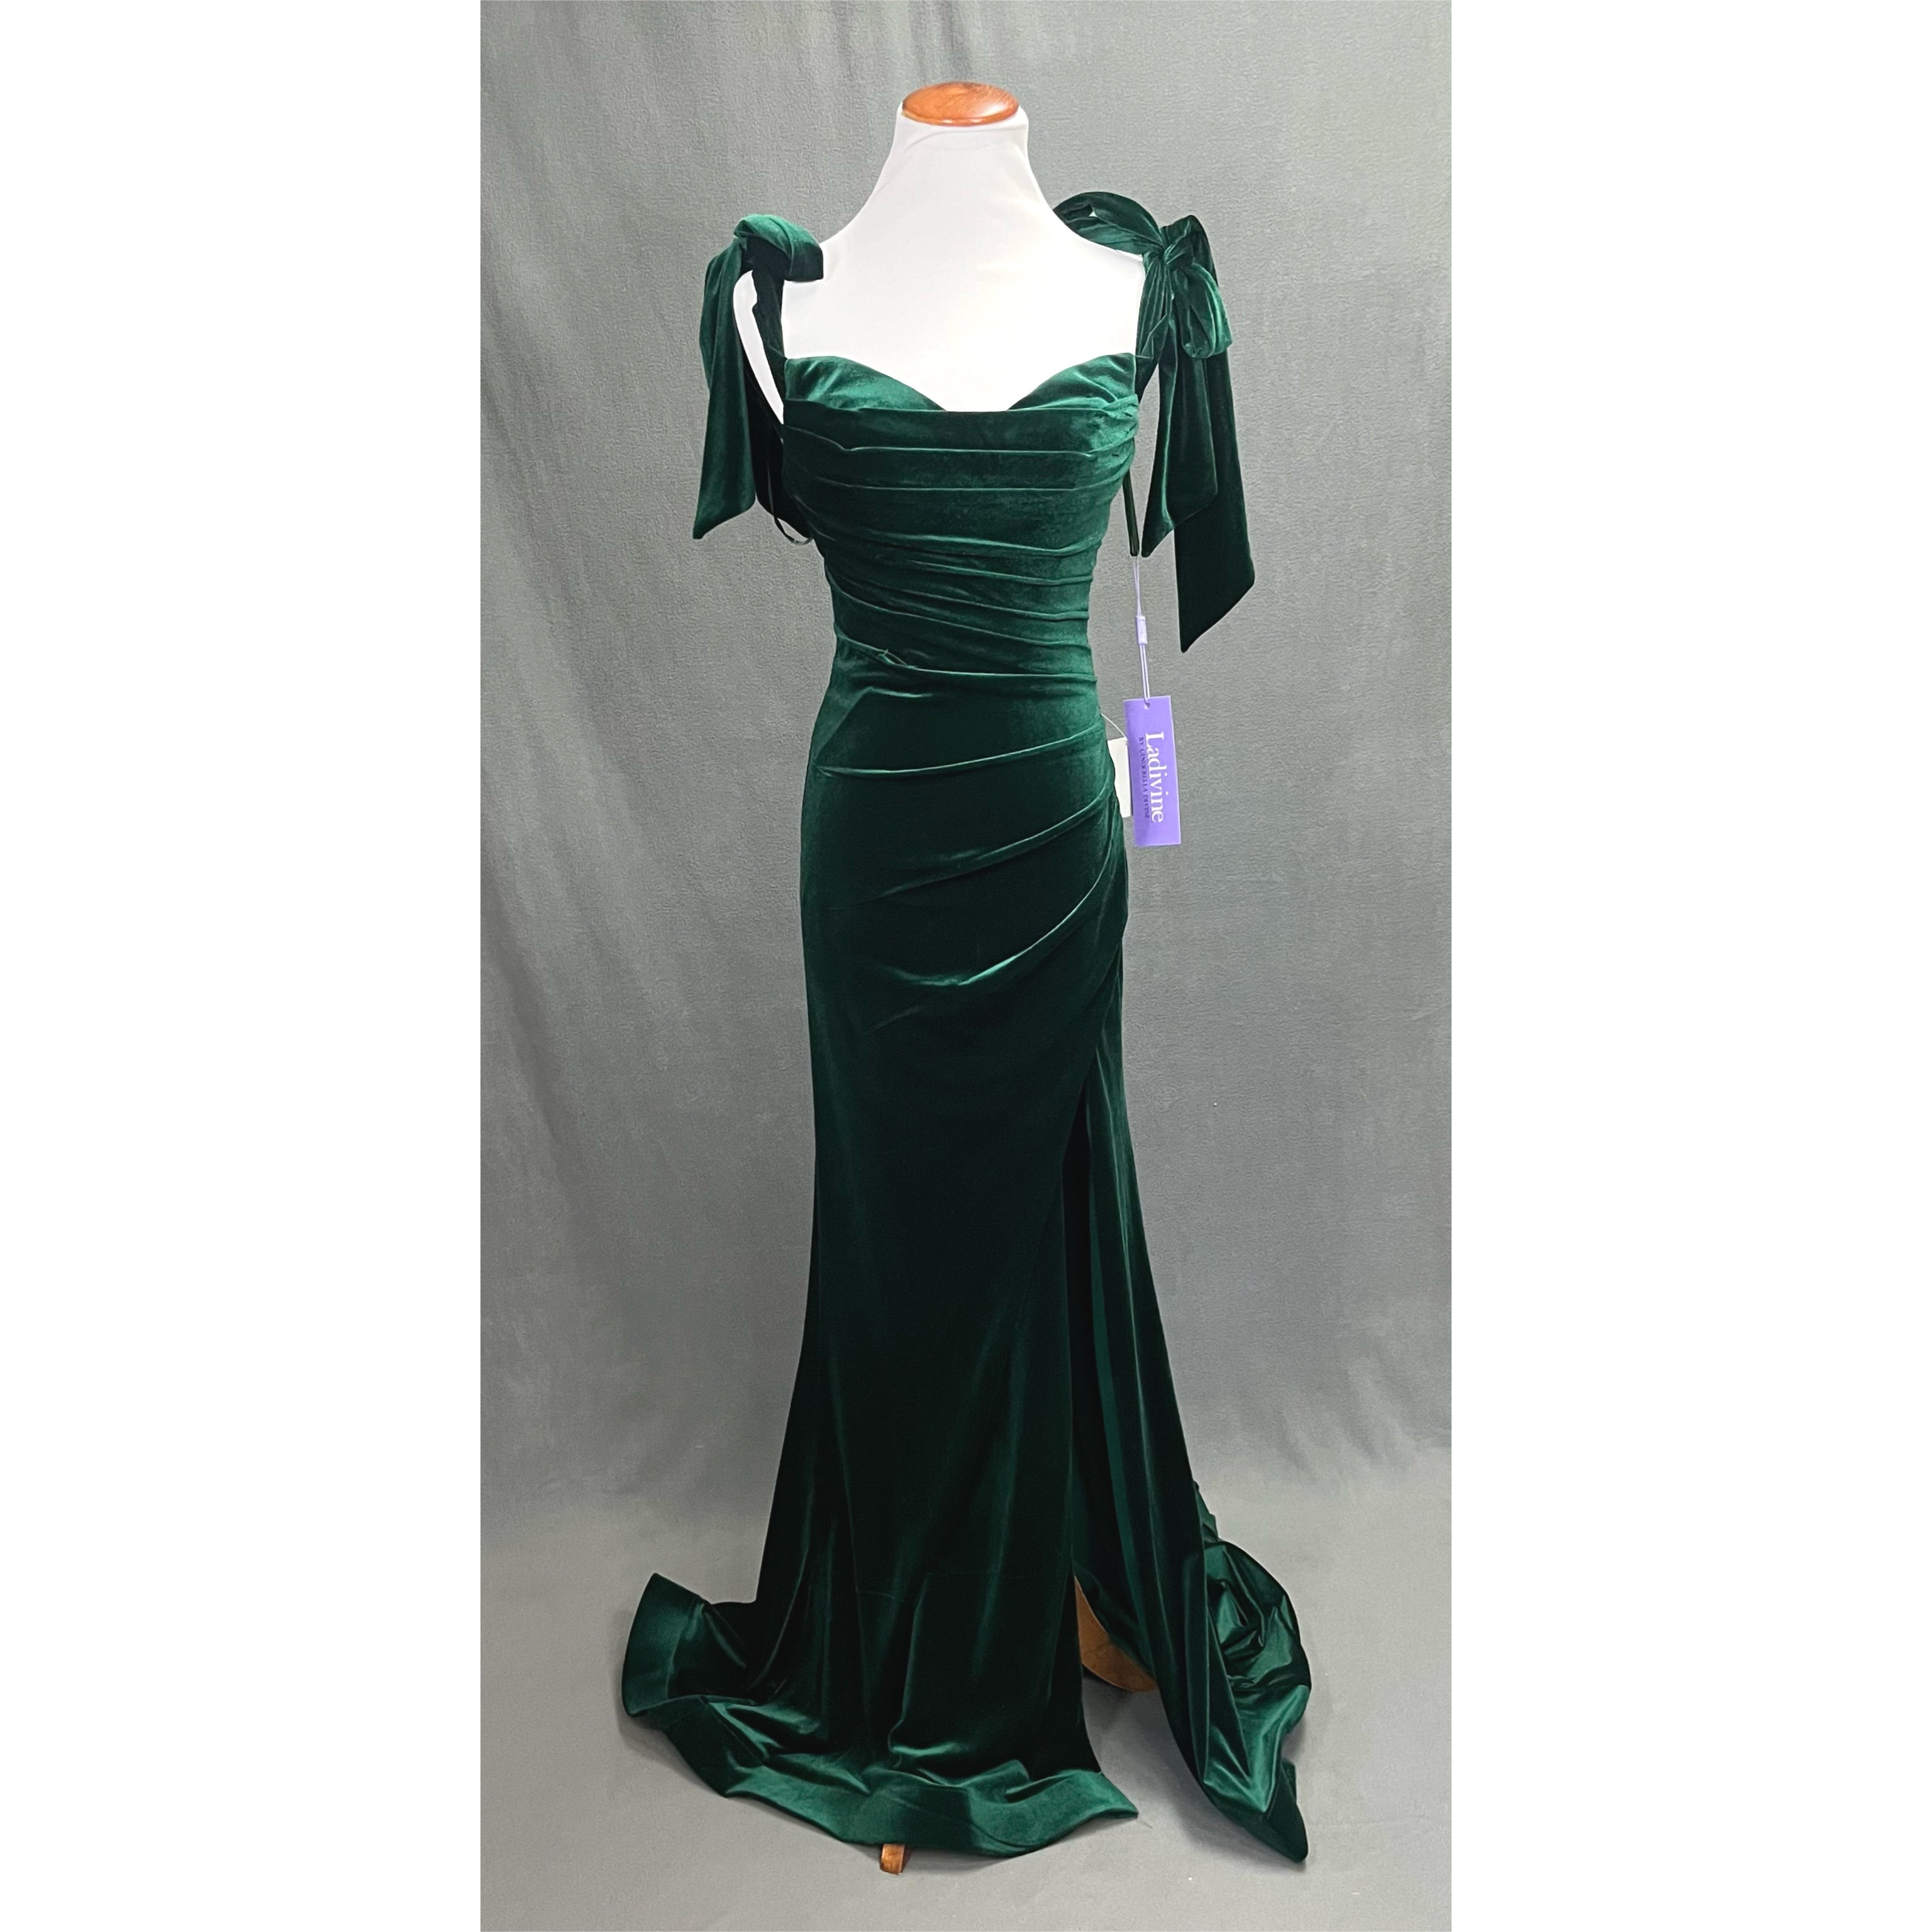 LaDivine evergreen velvet dress, size 4, NEW WITH TAGS!